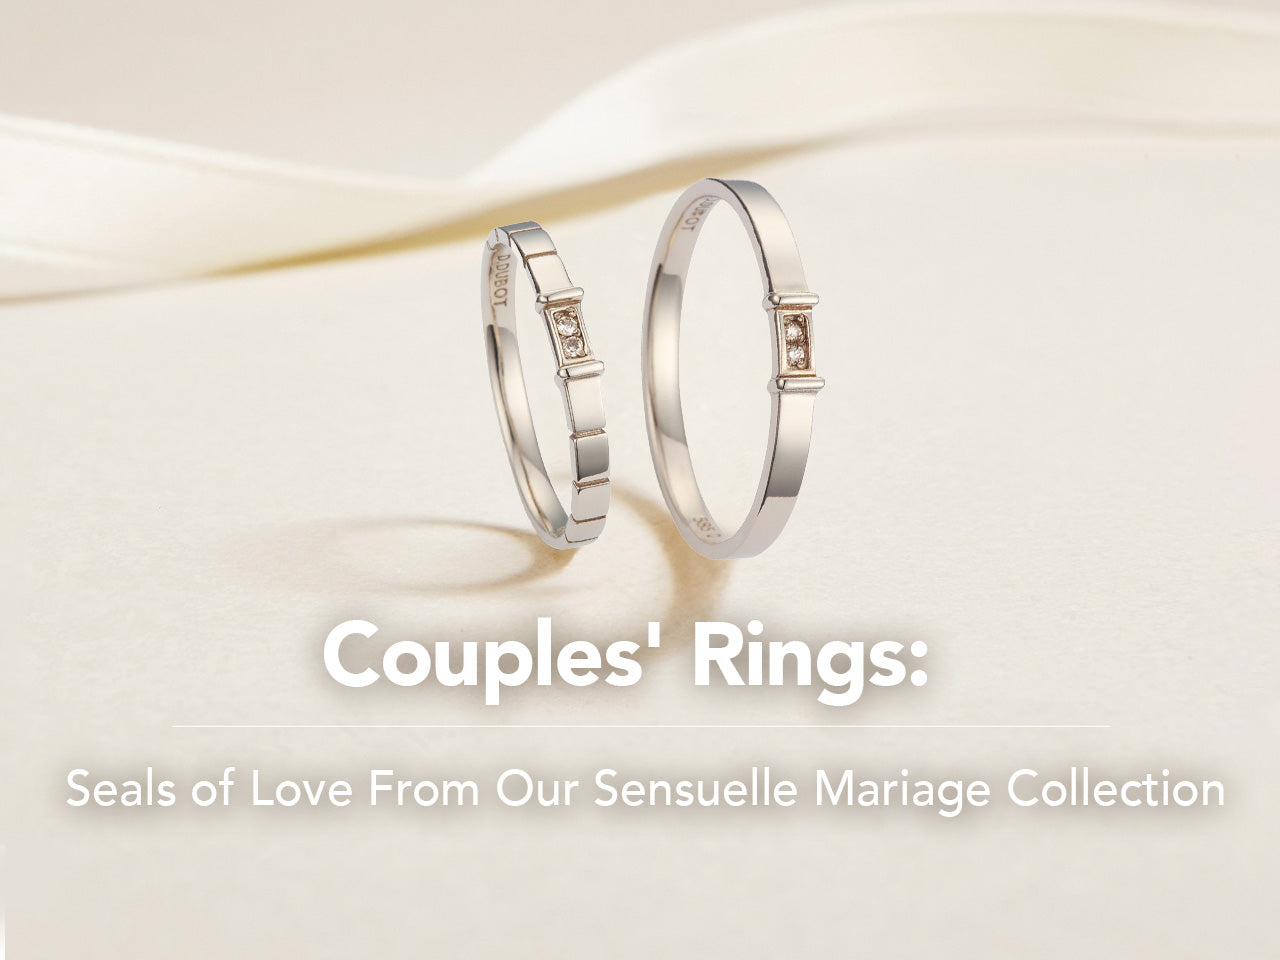 Couples' Rings: Seals of Love From Our Sensuelle Mariage Collection